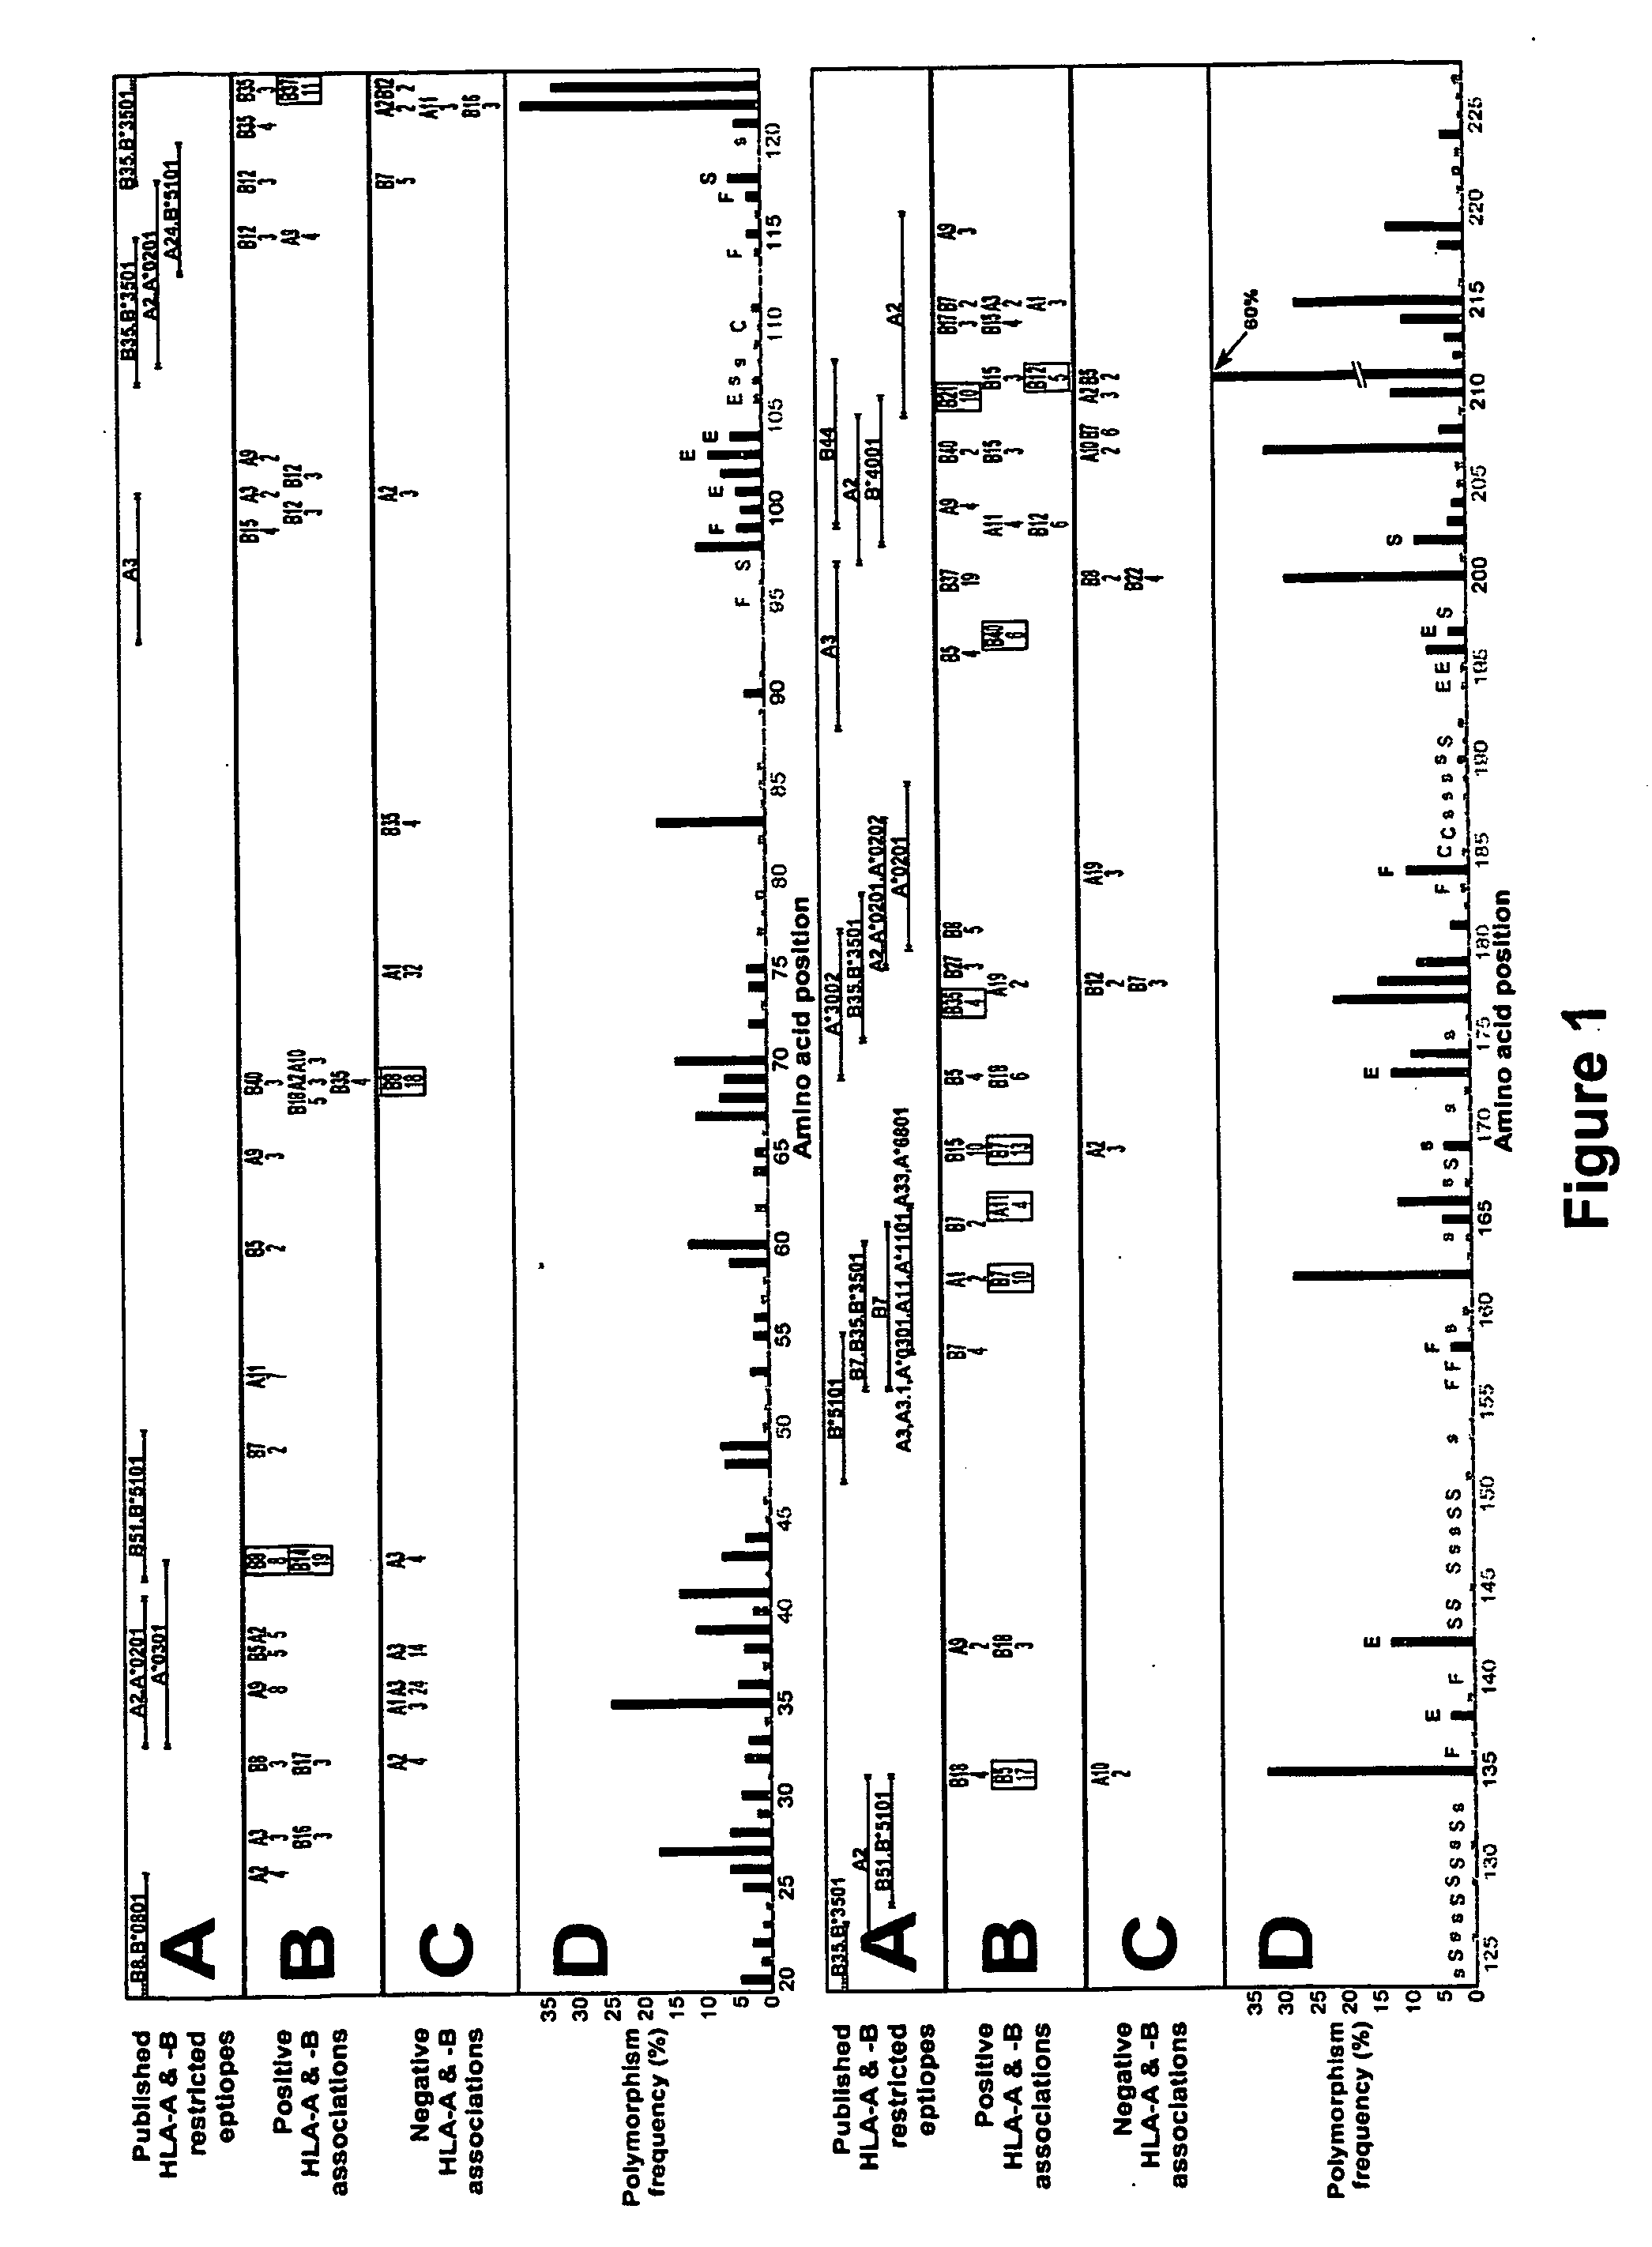 Method for identification and development of therapeutic agents